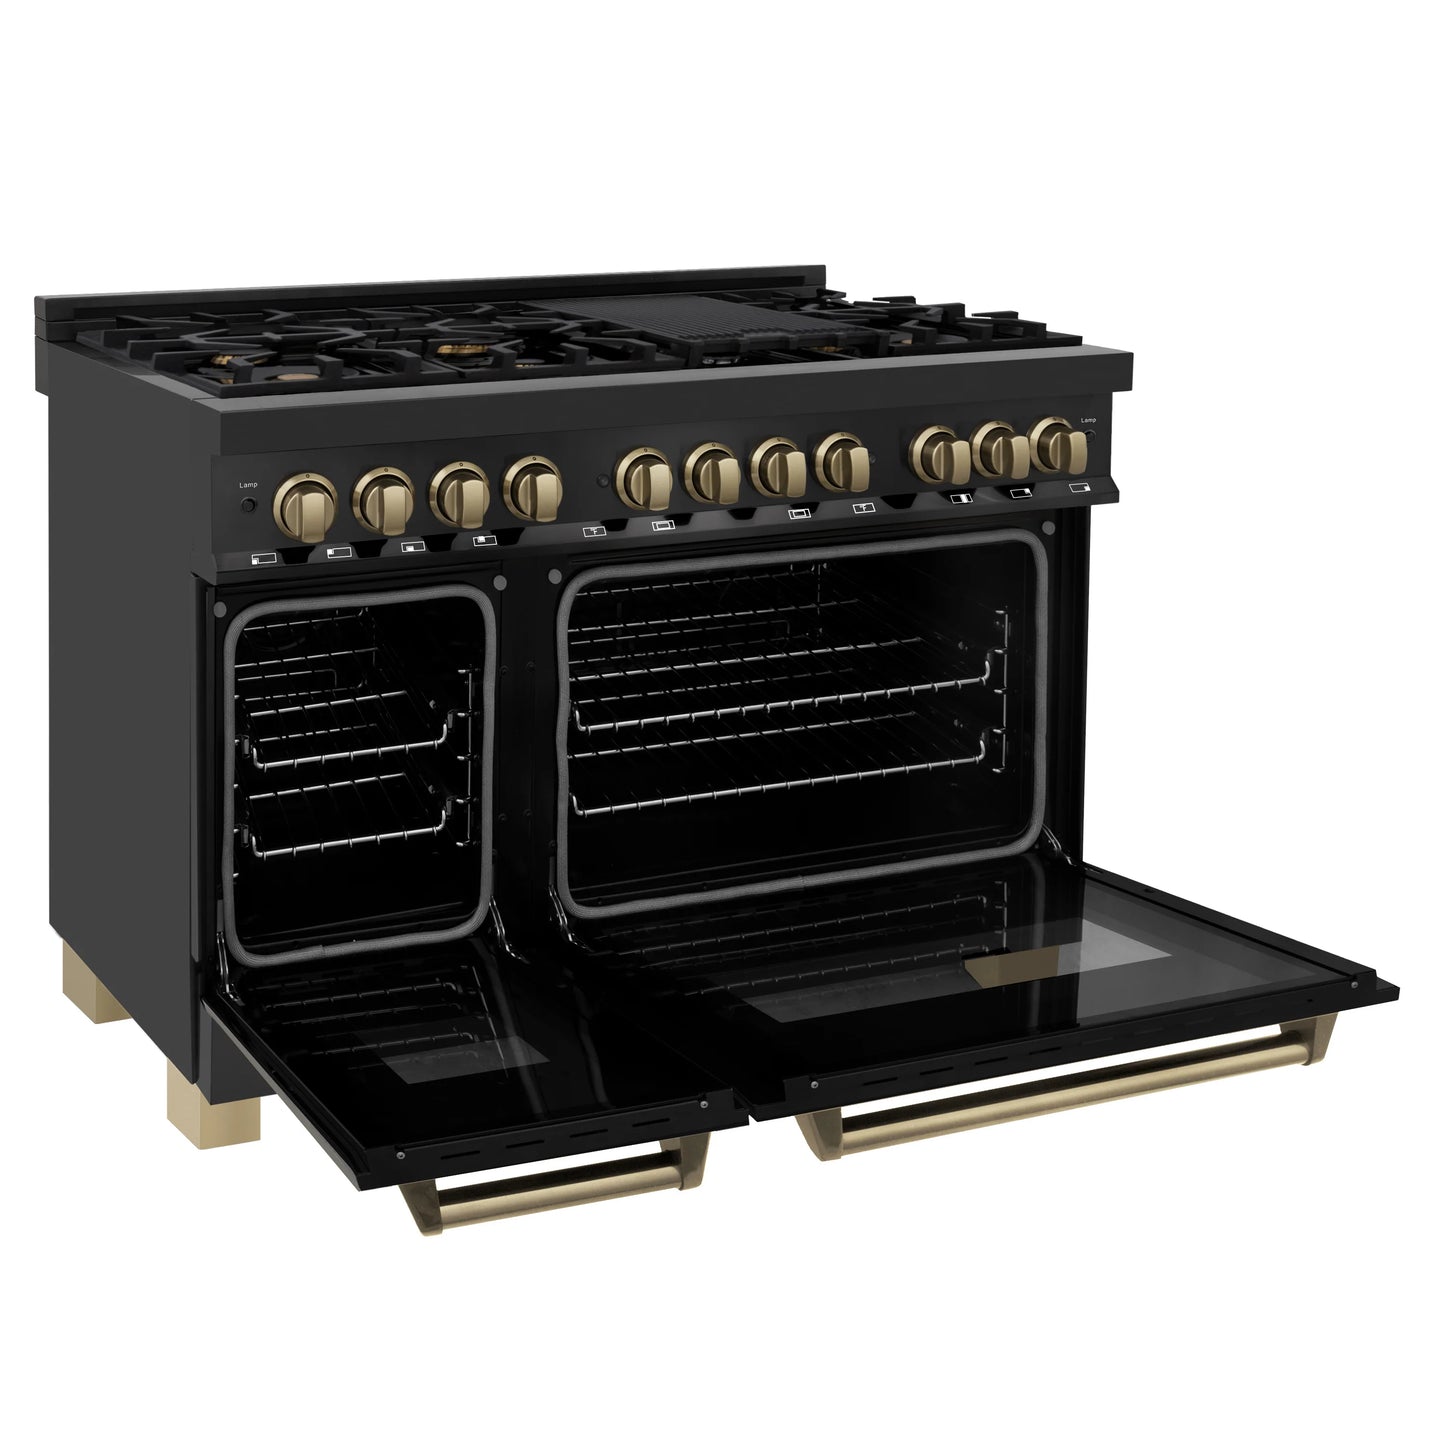 ZLINE Autograph Edition 48 in. Dual Fuel Range with Gas Stove and Electric Oven in Black Stainless Steel with Champagne Bronze Accents (RABZ-48-CB)